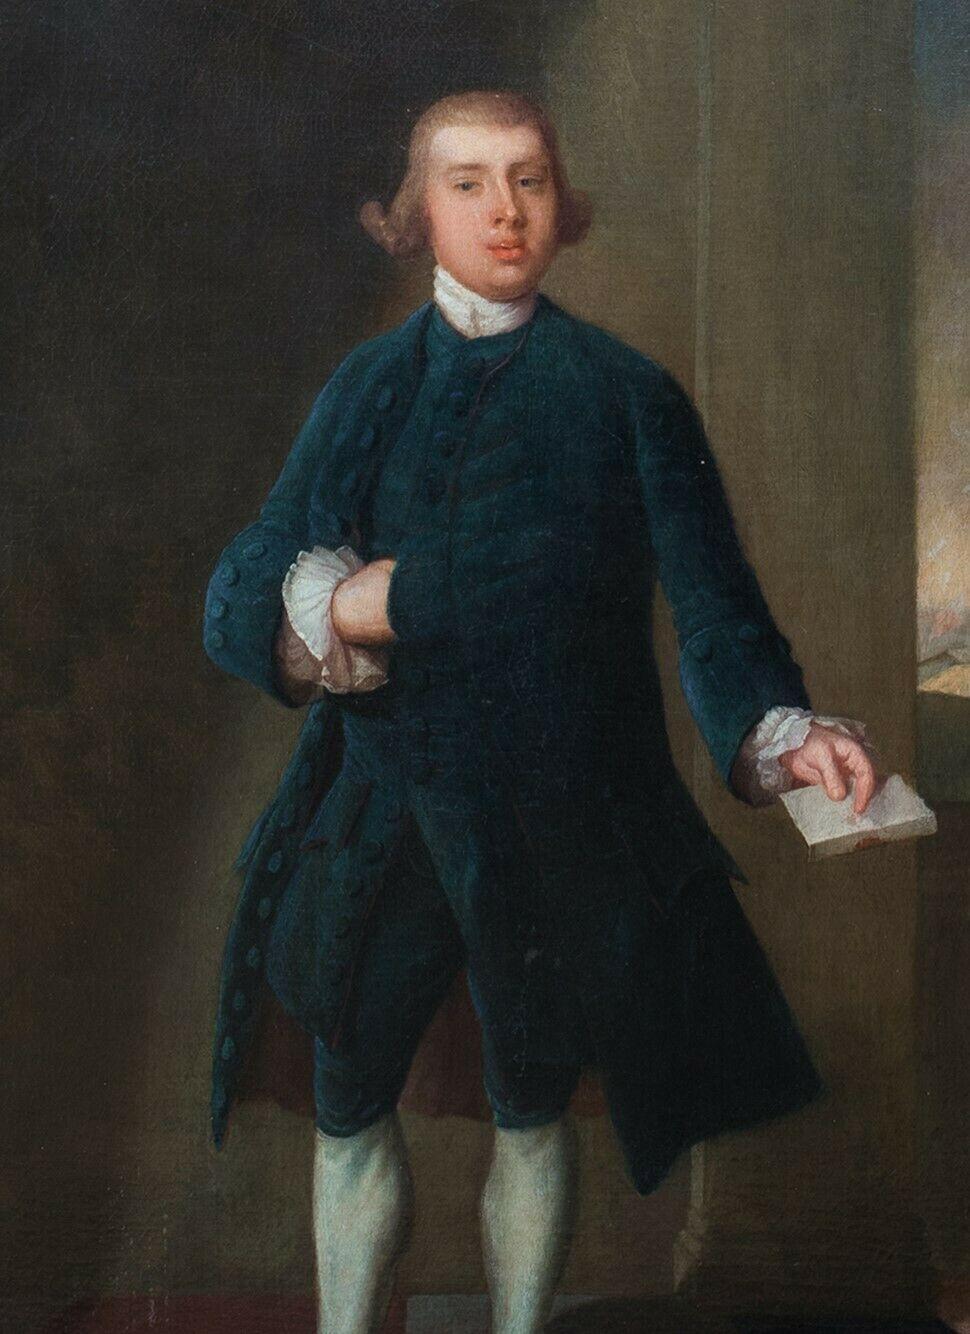 Portrait Of Henry Farington, East India Company, 18th Century - Painting by Arthur Devis